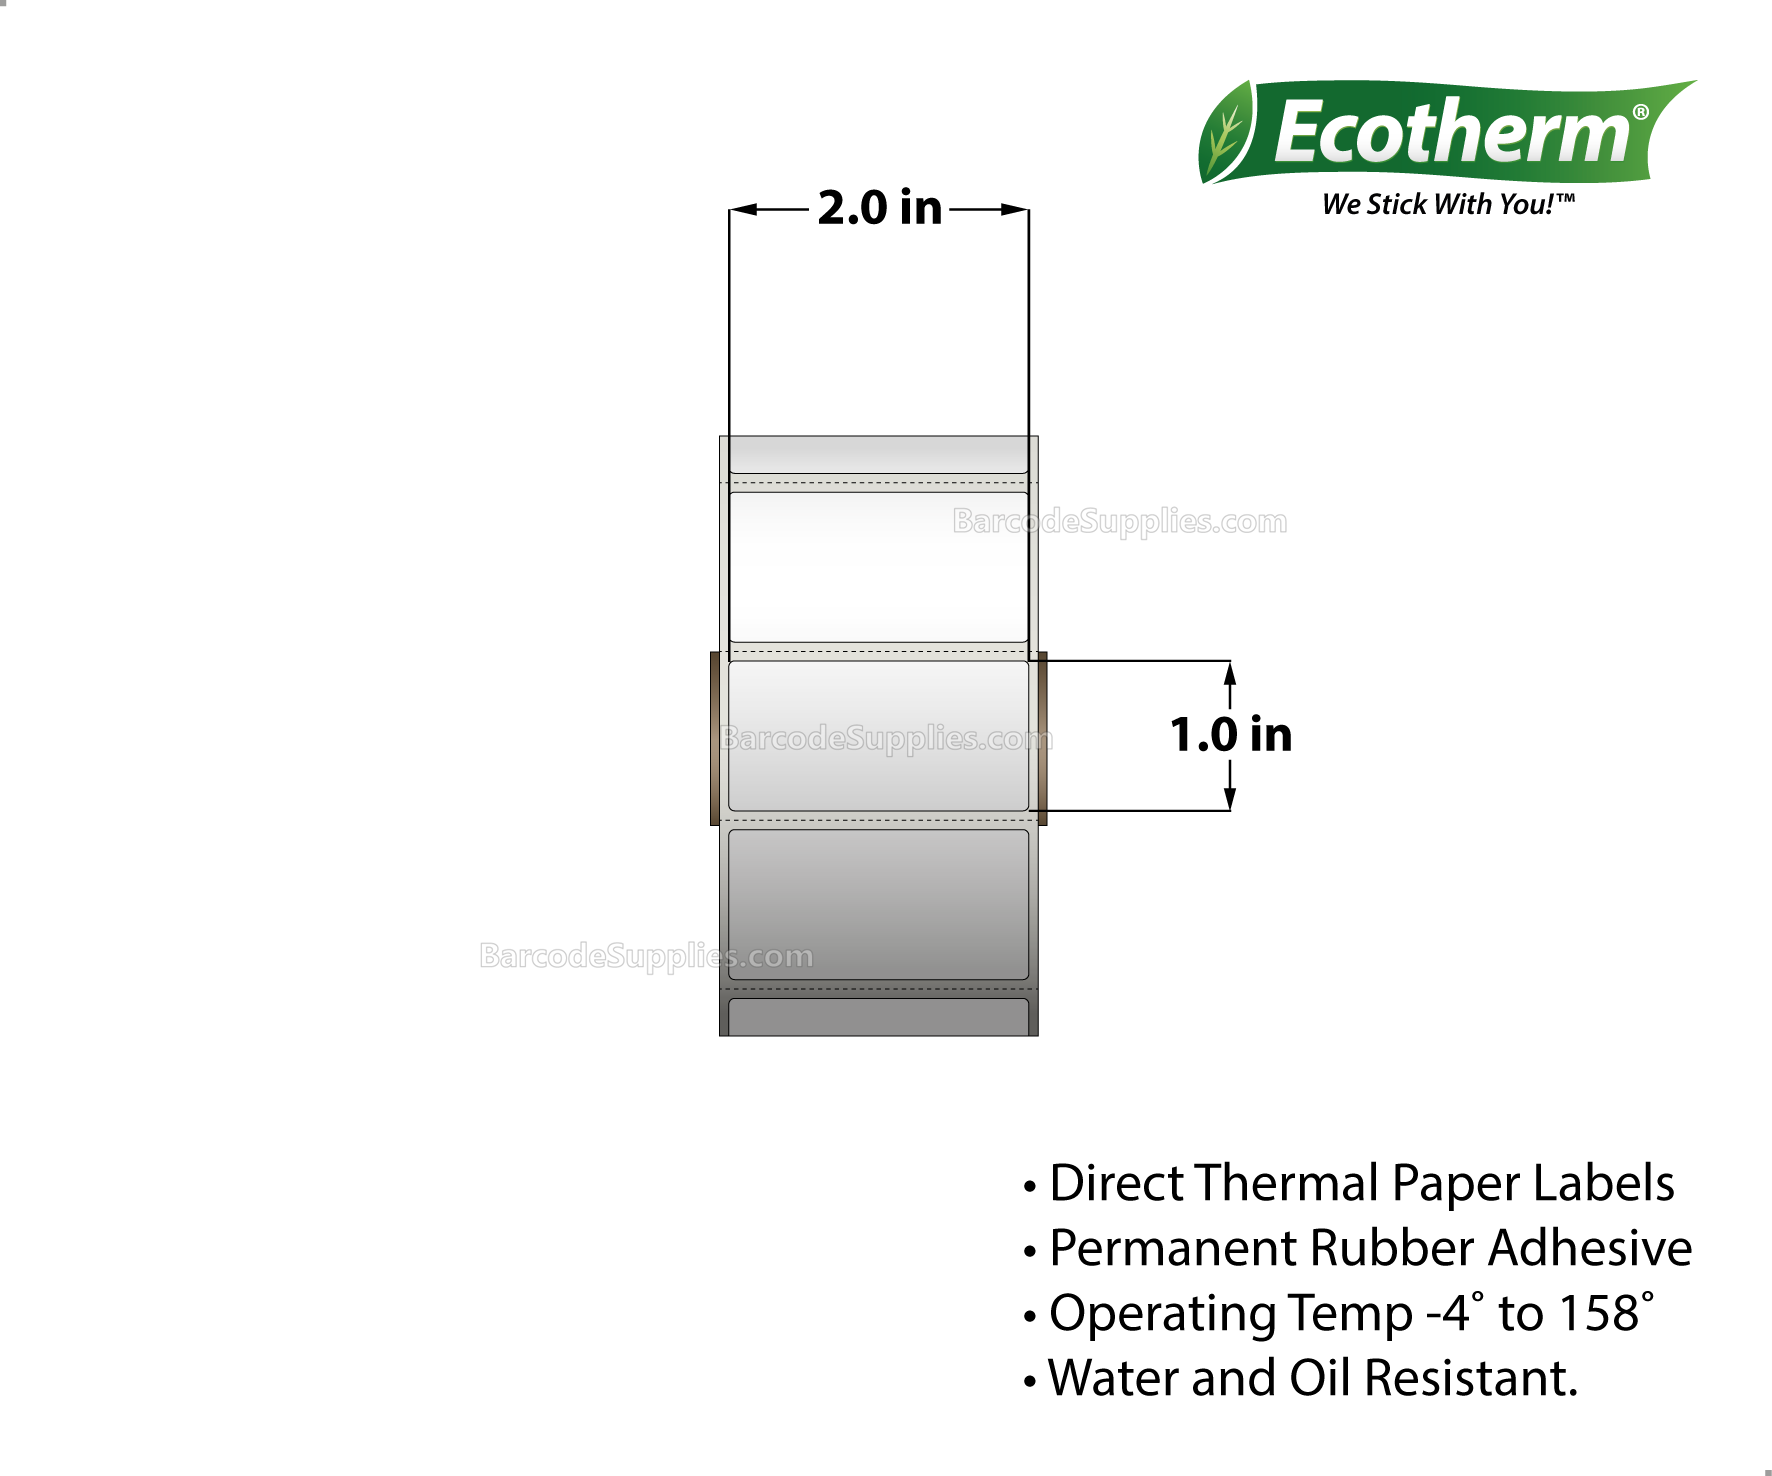 2 x 1 Direct Thermal White Labels With Rubber Adhesive - Perforated - 1400 Labels Per Roll - Carton Of 4 Rolls - 5600 Labels Total - MPN: ECOTHERM14120-4